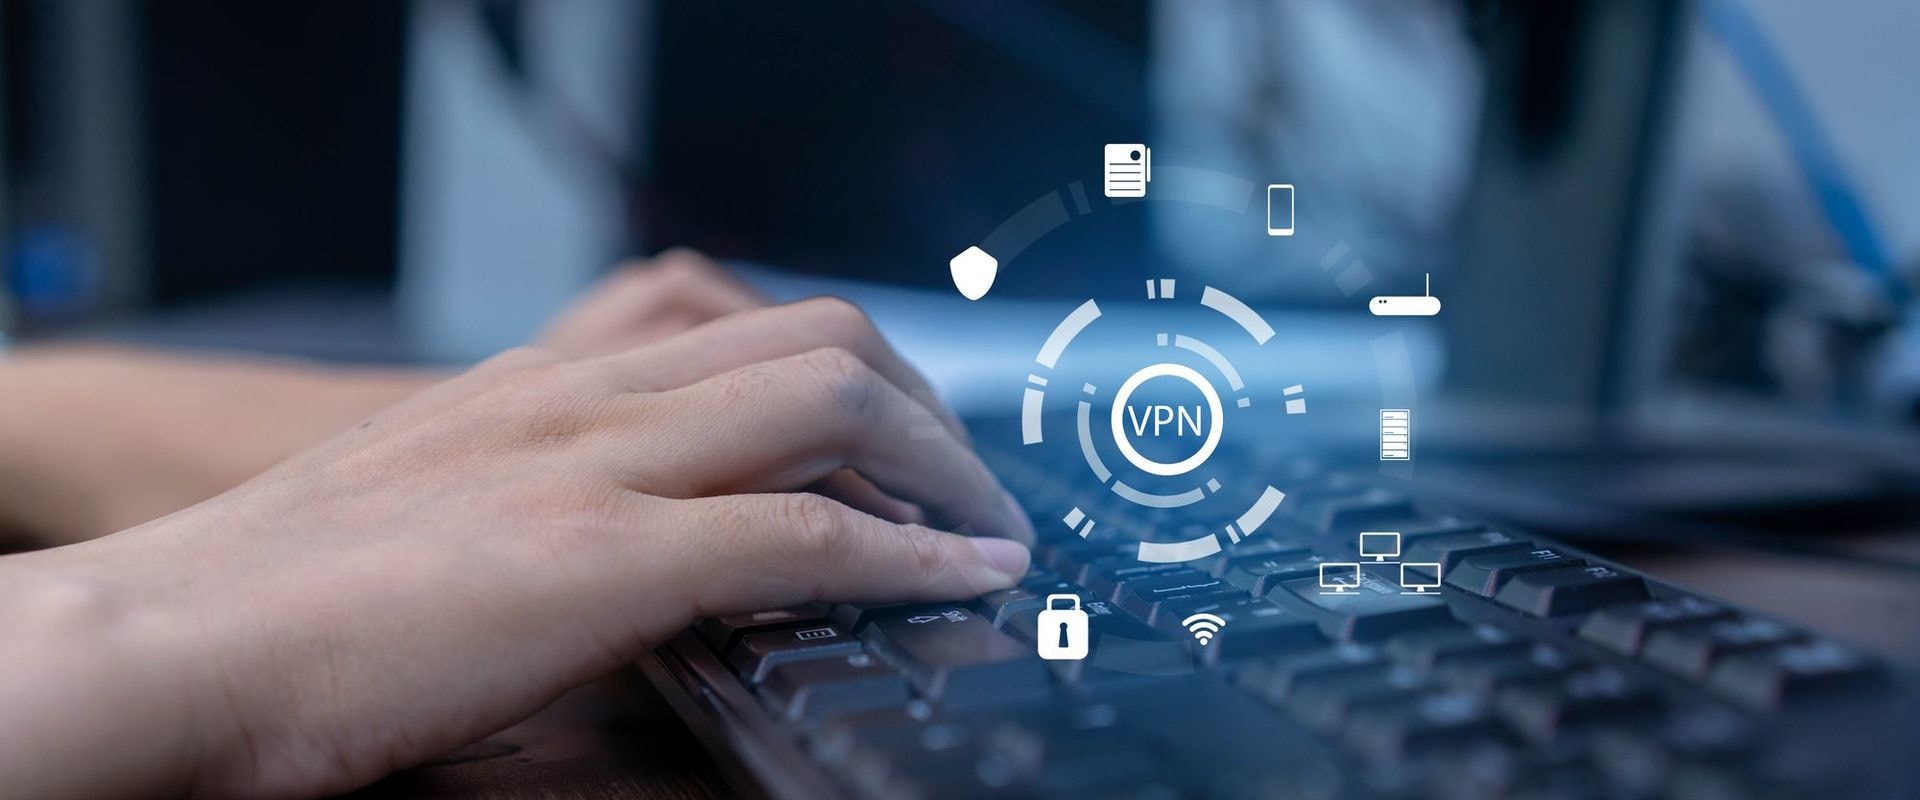 24/7 Support: The Key to Choosing the Best VPN Provider